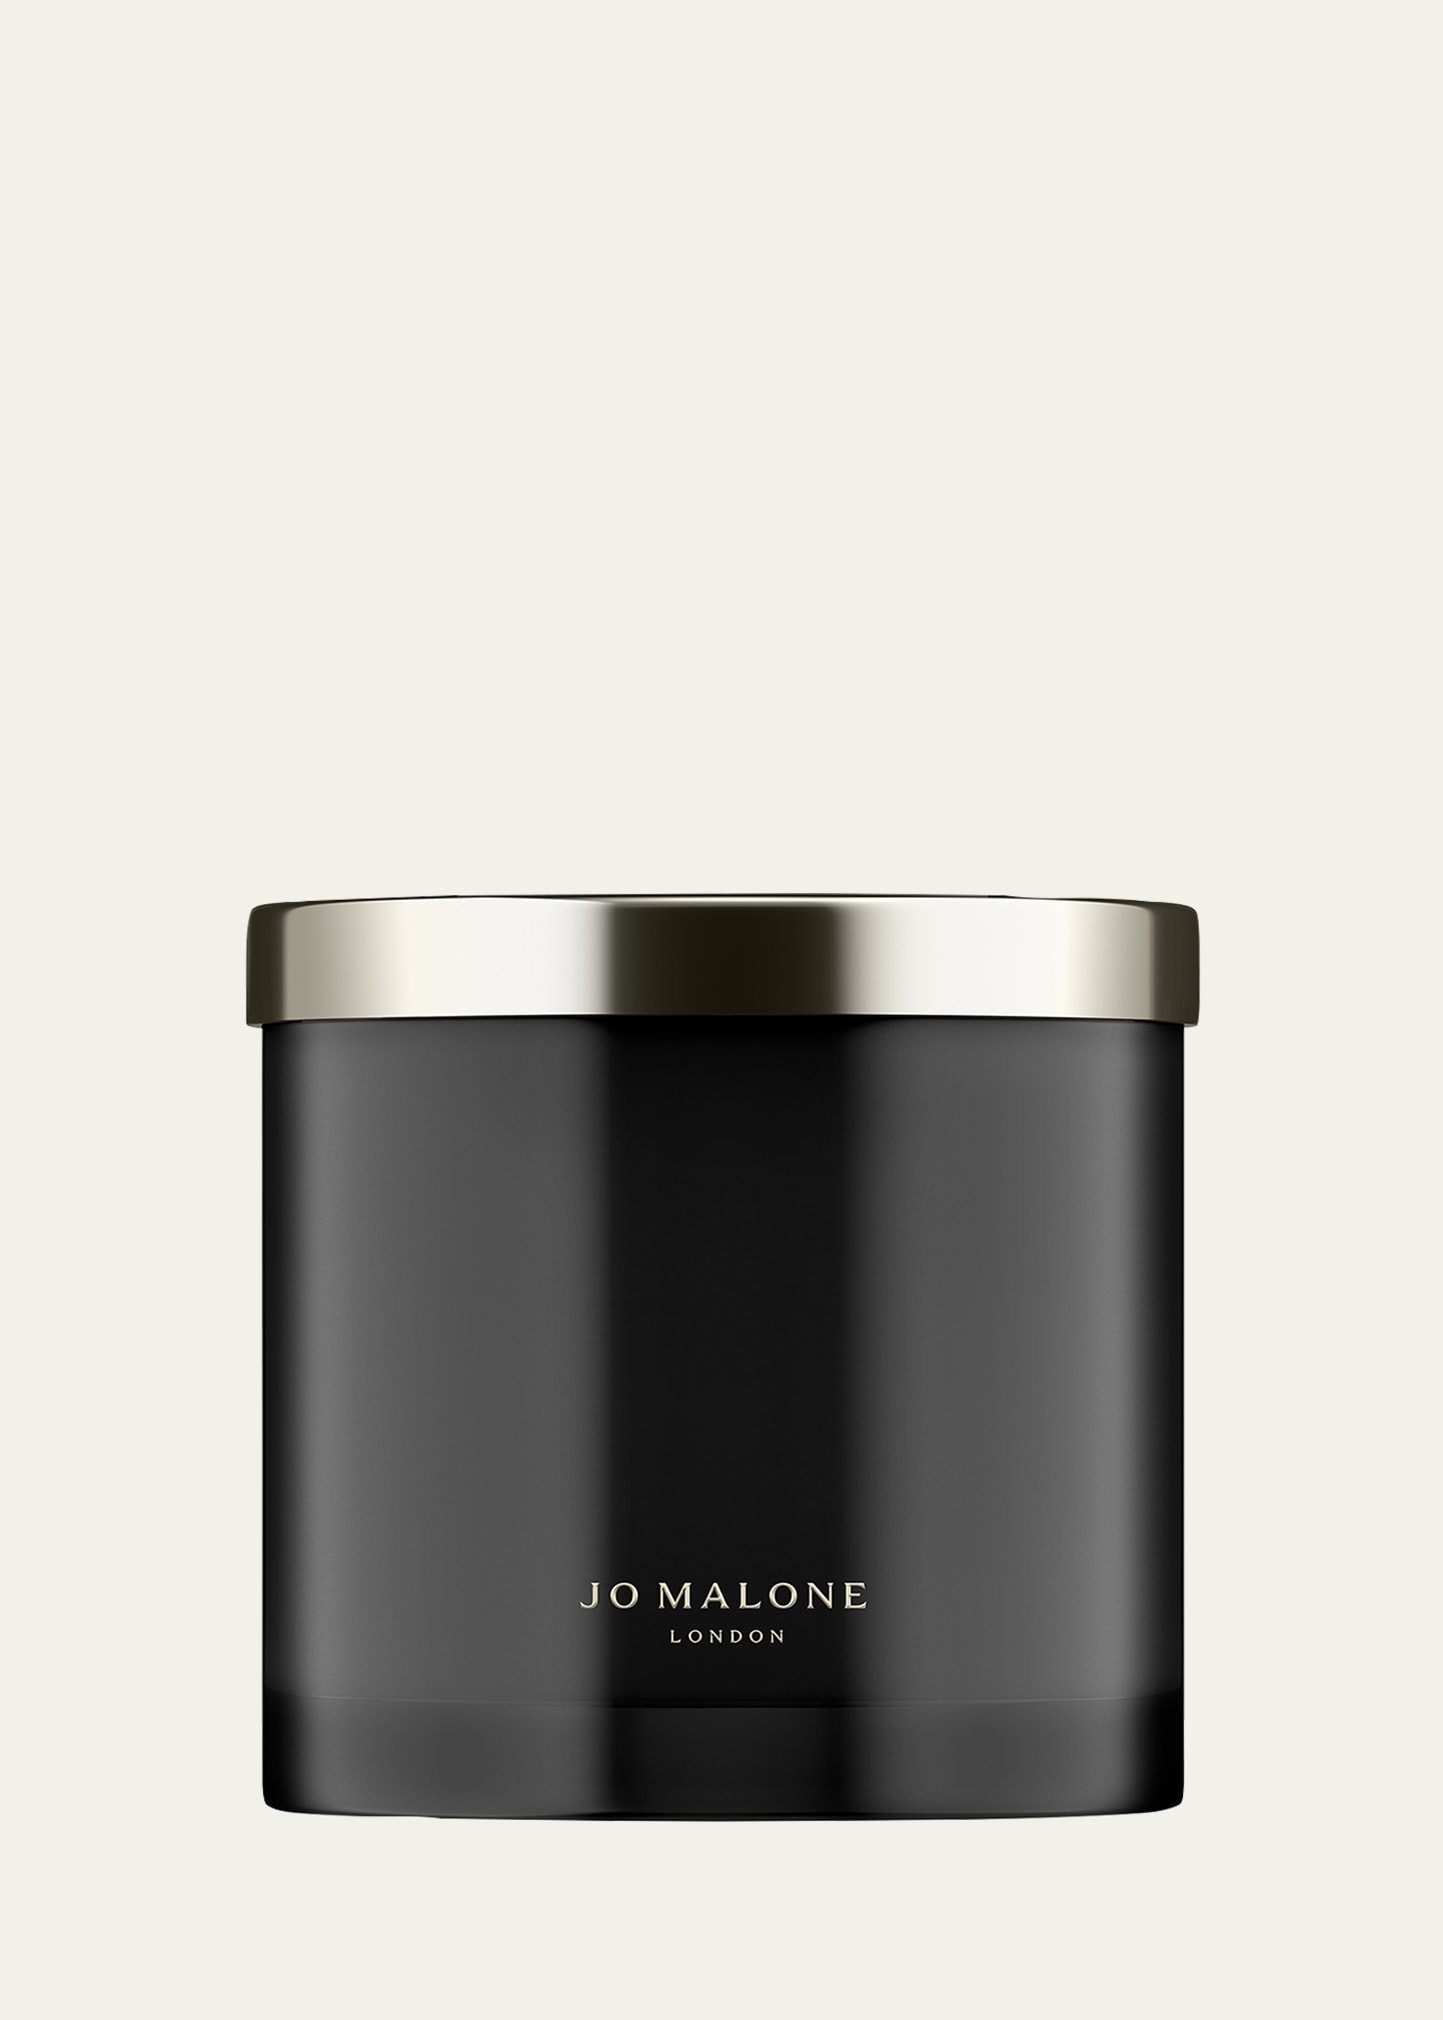 Jo Malone London Velvet Rose and Oud Deluxe Candle, 21 oz.